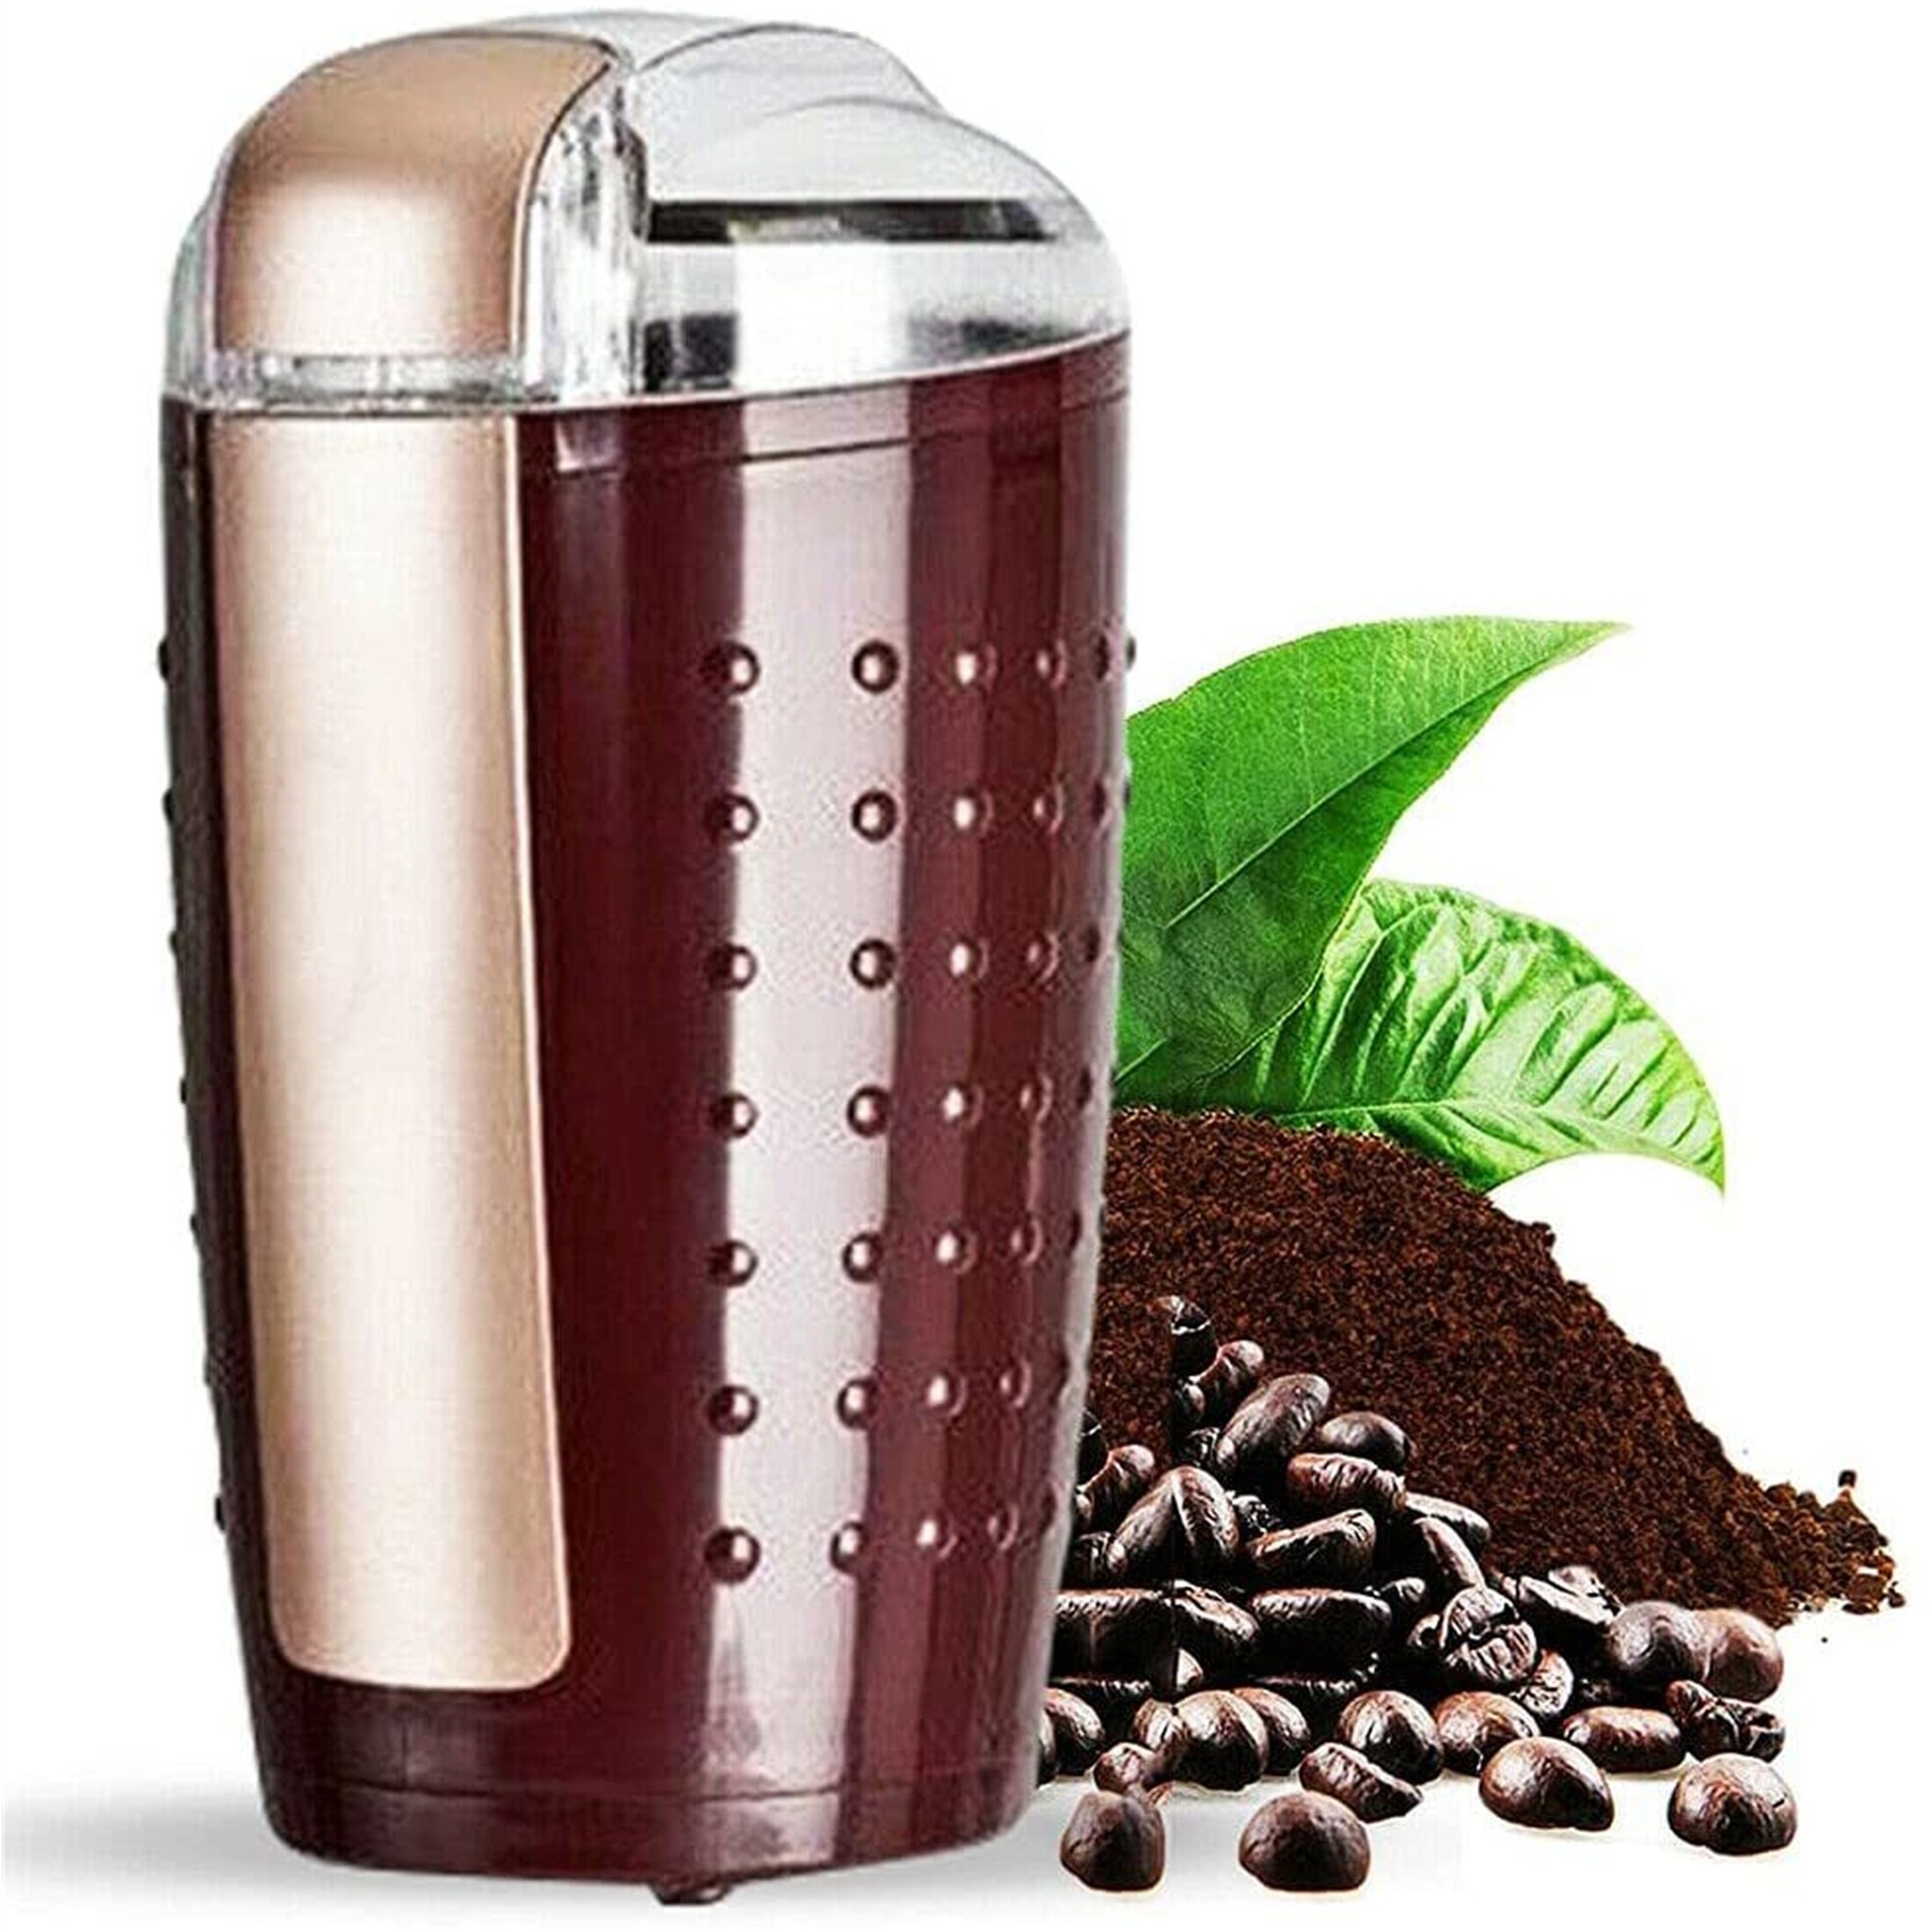 Hamilton Beach Fresh Grind 4.5oz Electric Coffee Grinder for Beans, Spices  and More, Stainless Steel & 2-Way Brewer Coffee Maker, Single-Serve and